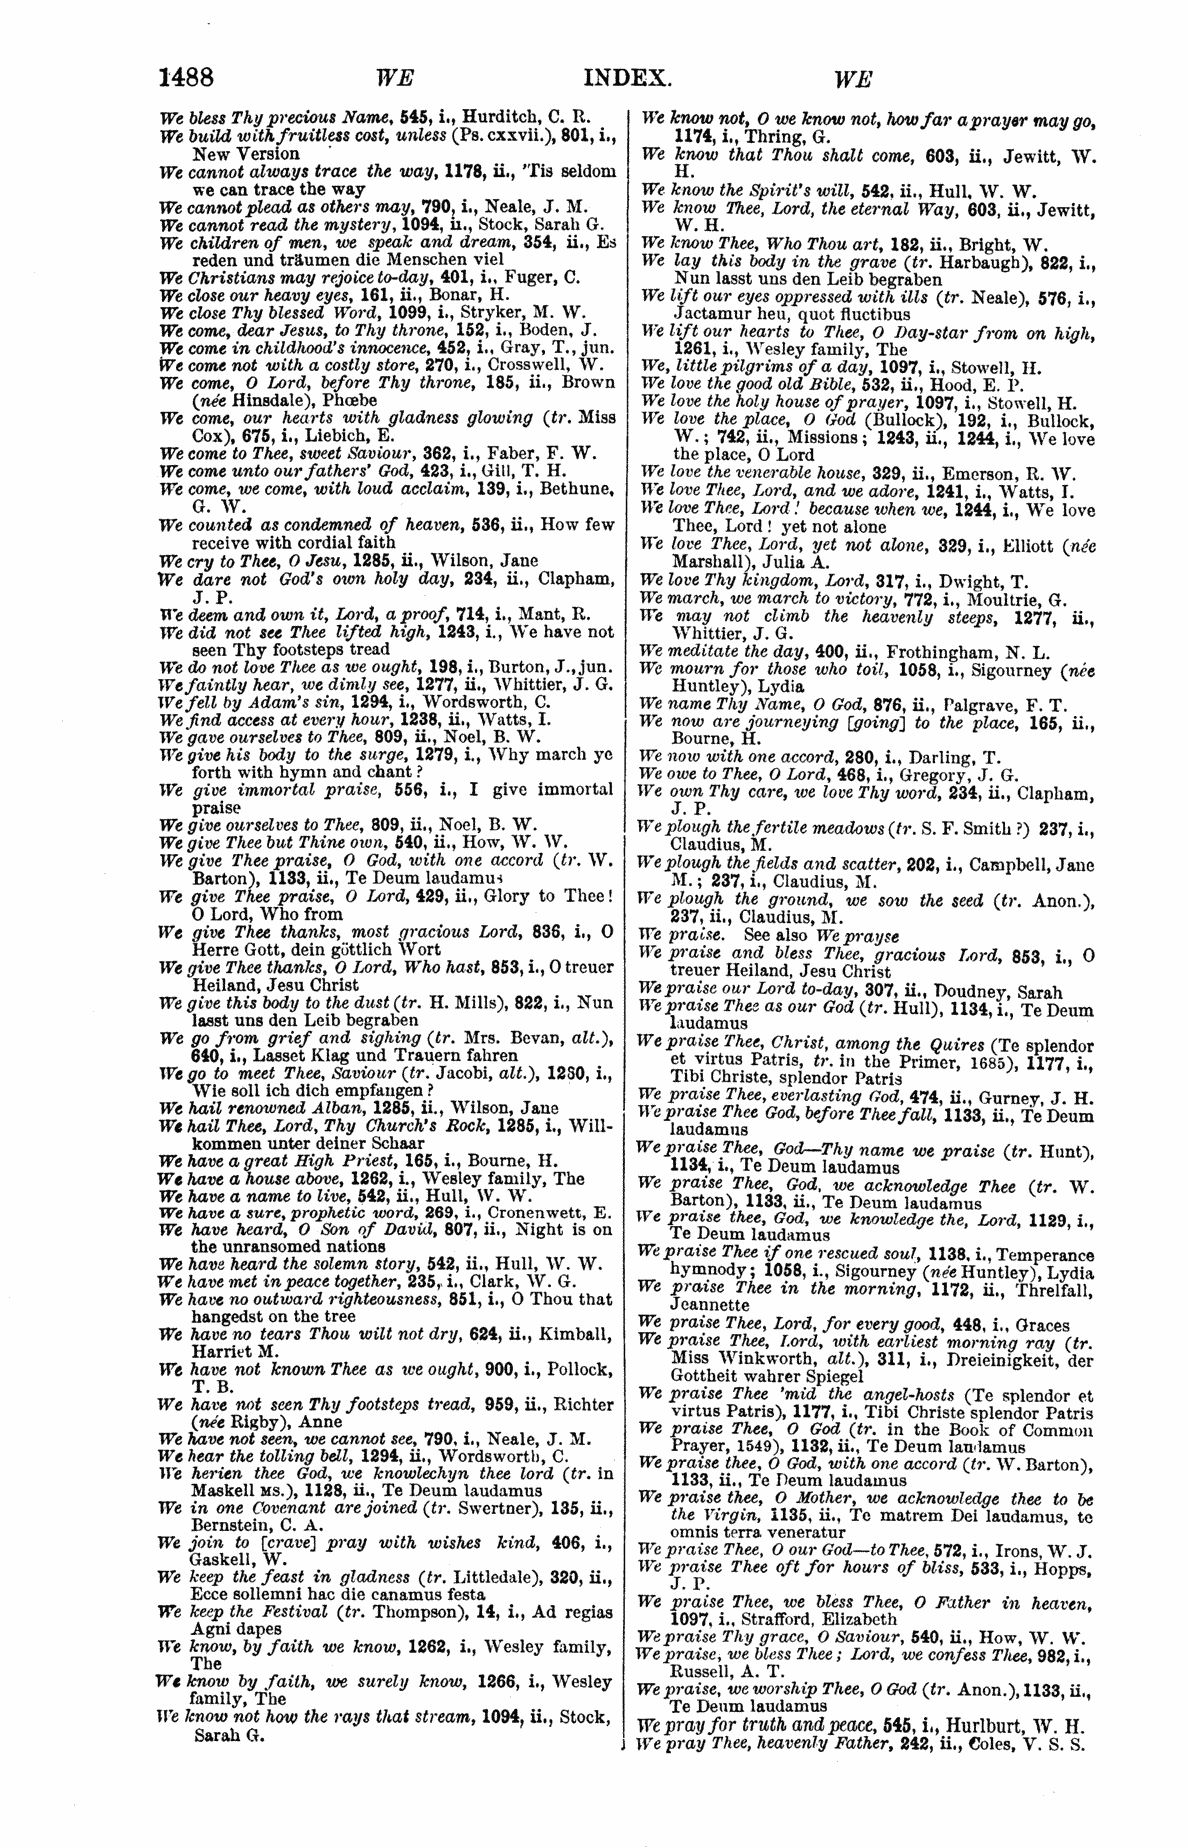 Image of page 1488